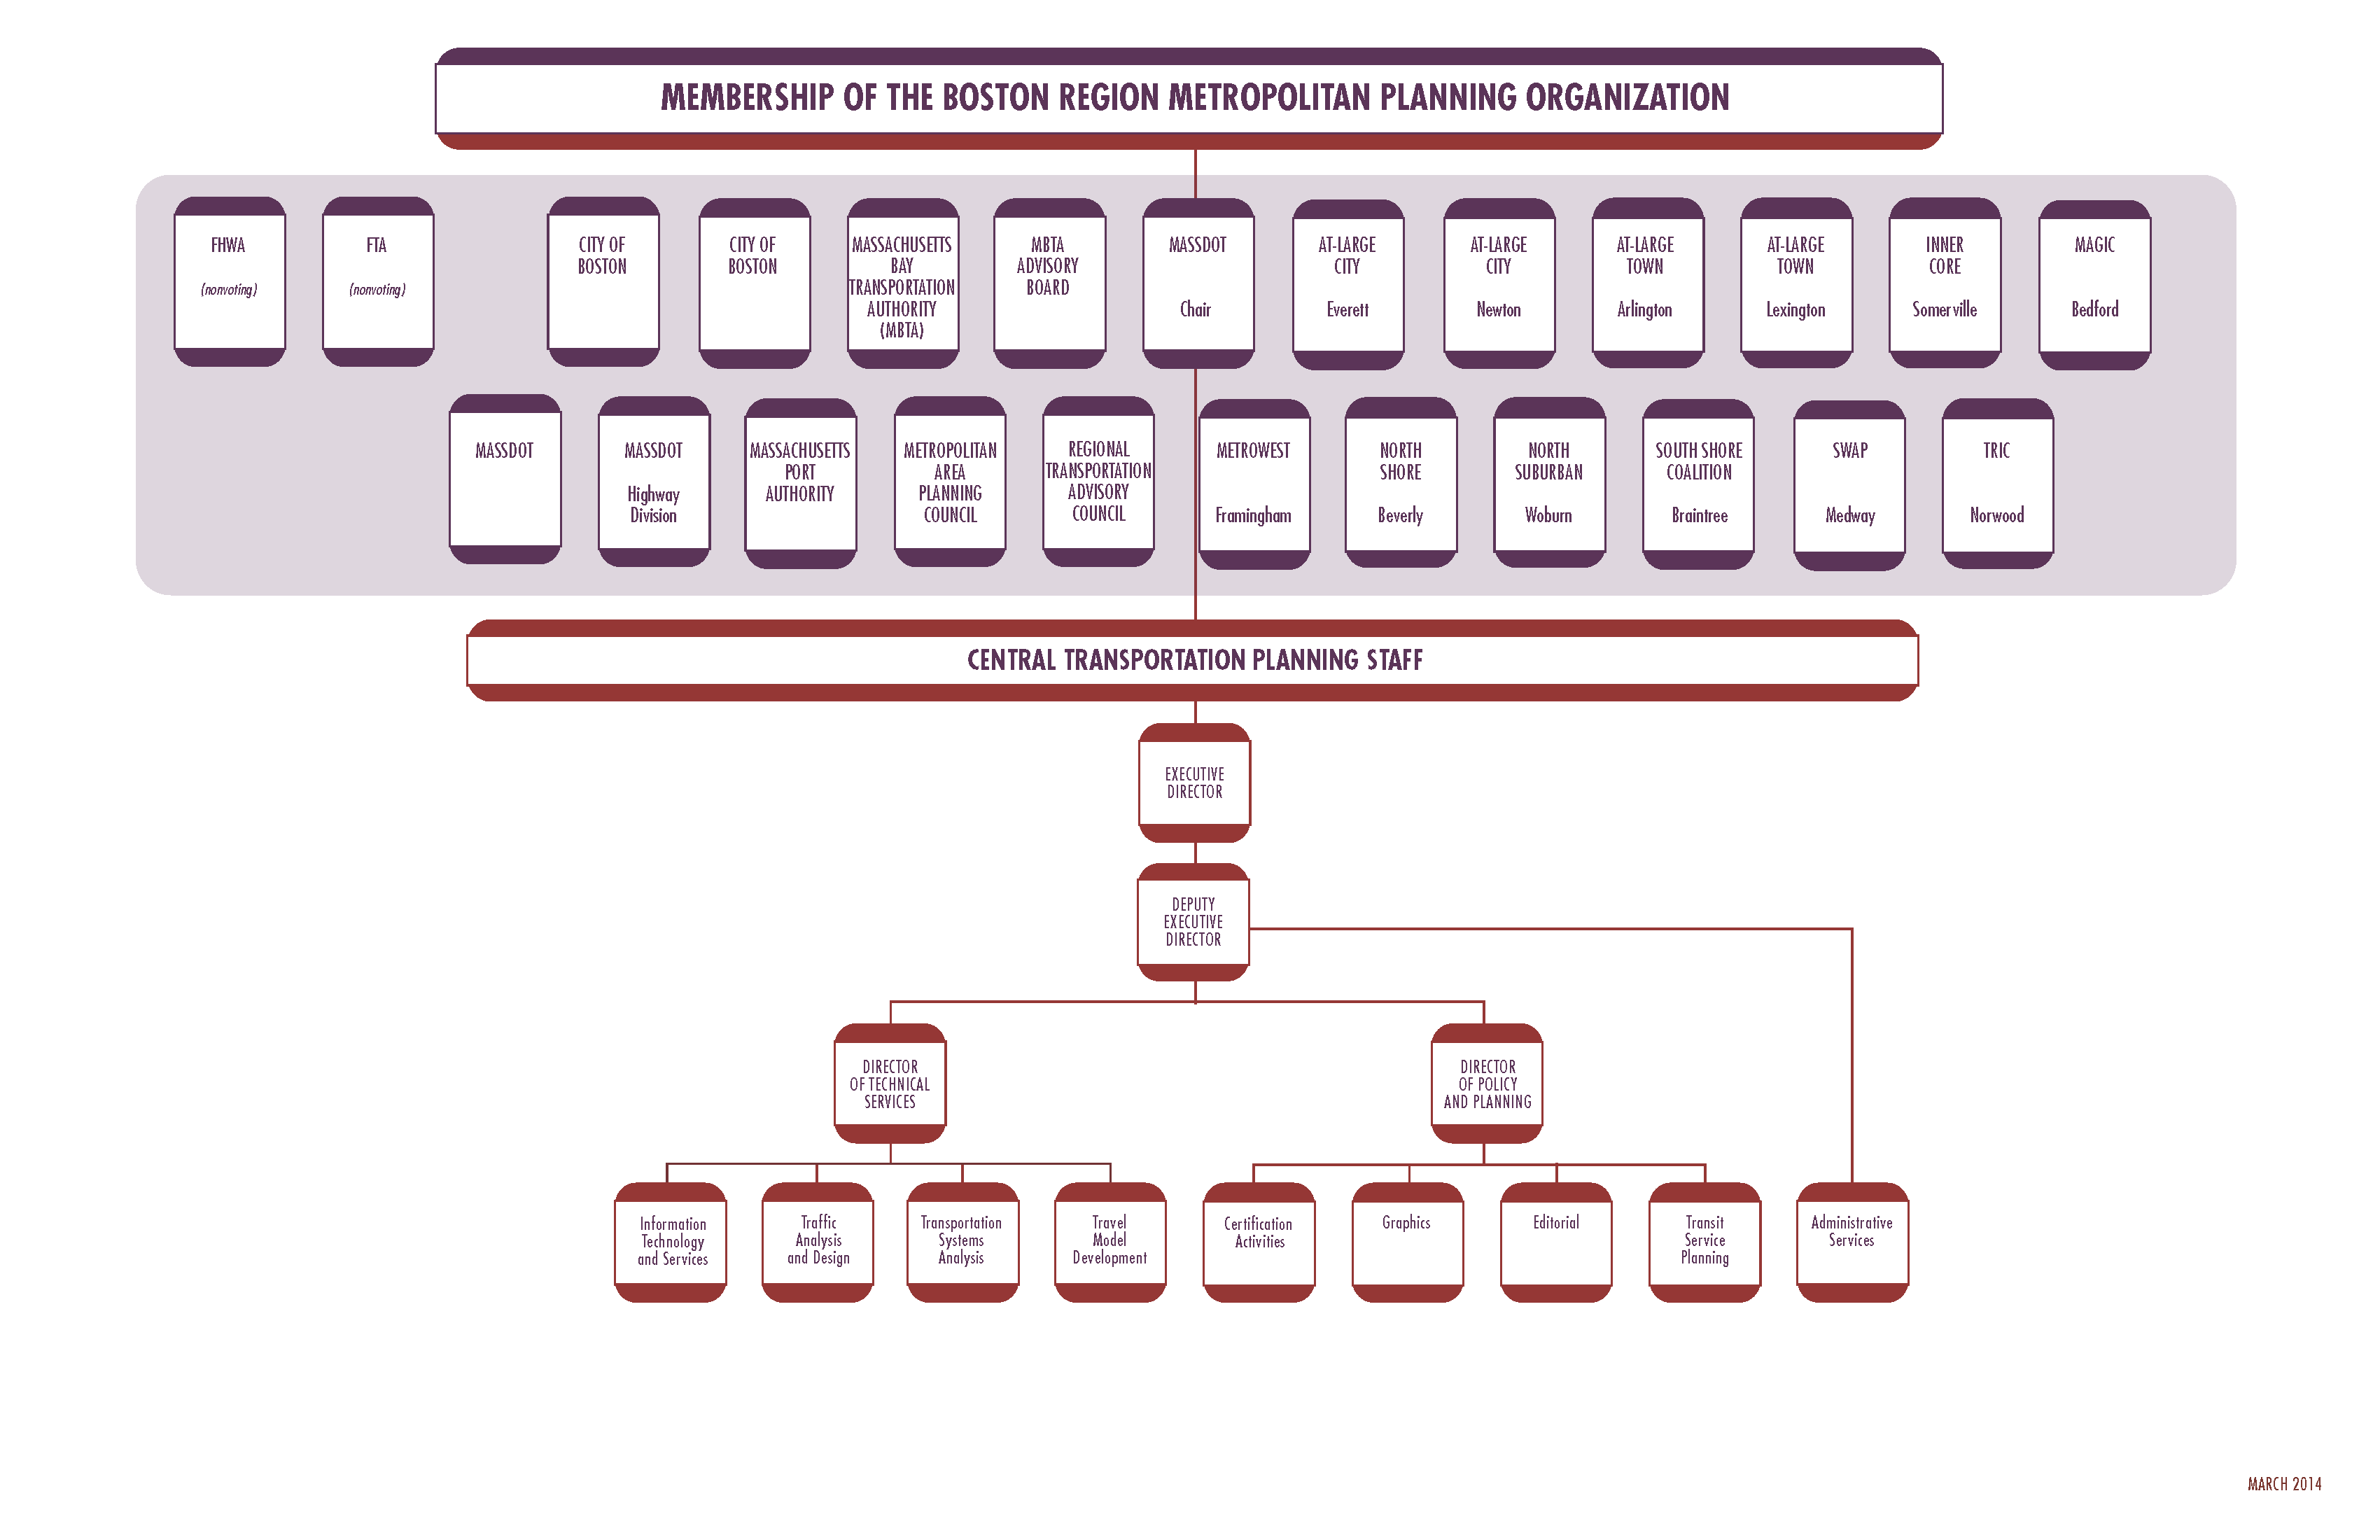 This figure shows the membership of the Boston Region Metropolitan Planning Organization, as described in the chapter, along with the organizational chart of the Central Transportation Planning Staff (CTPS) below.